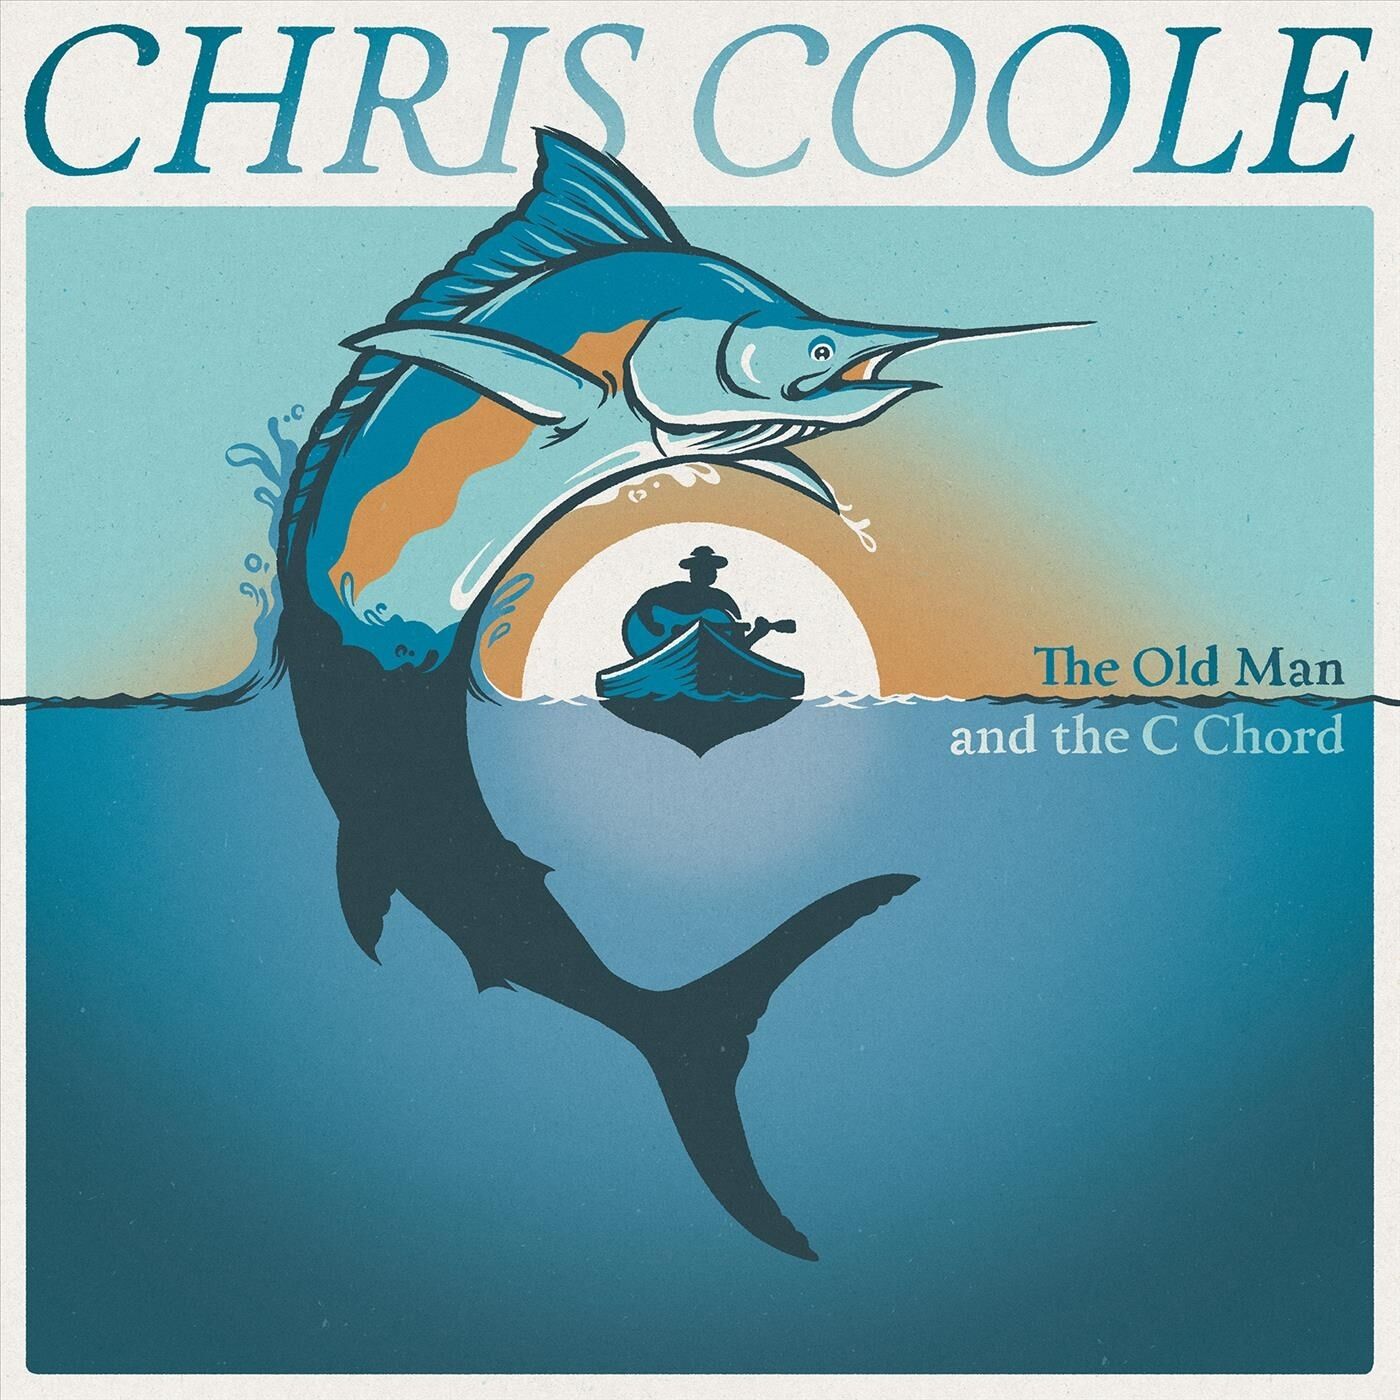 Chris Coole - 2022 - The Old Man and the C Chord